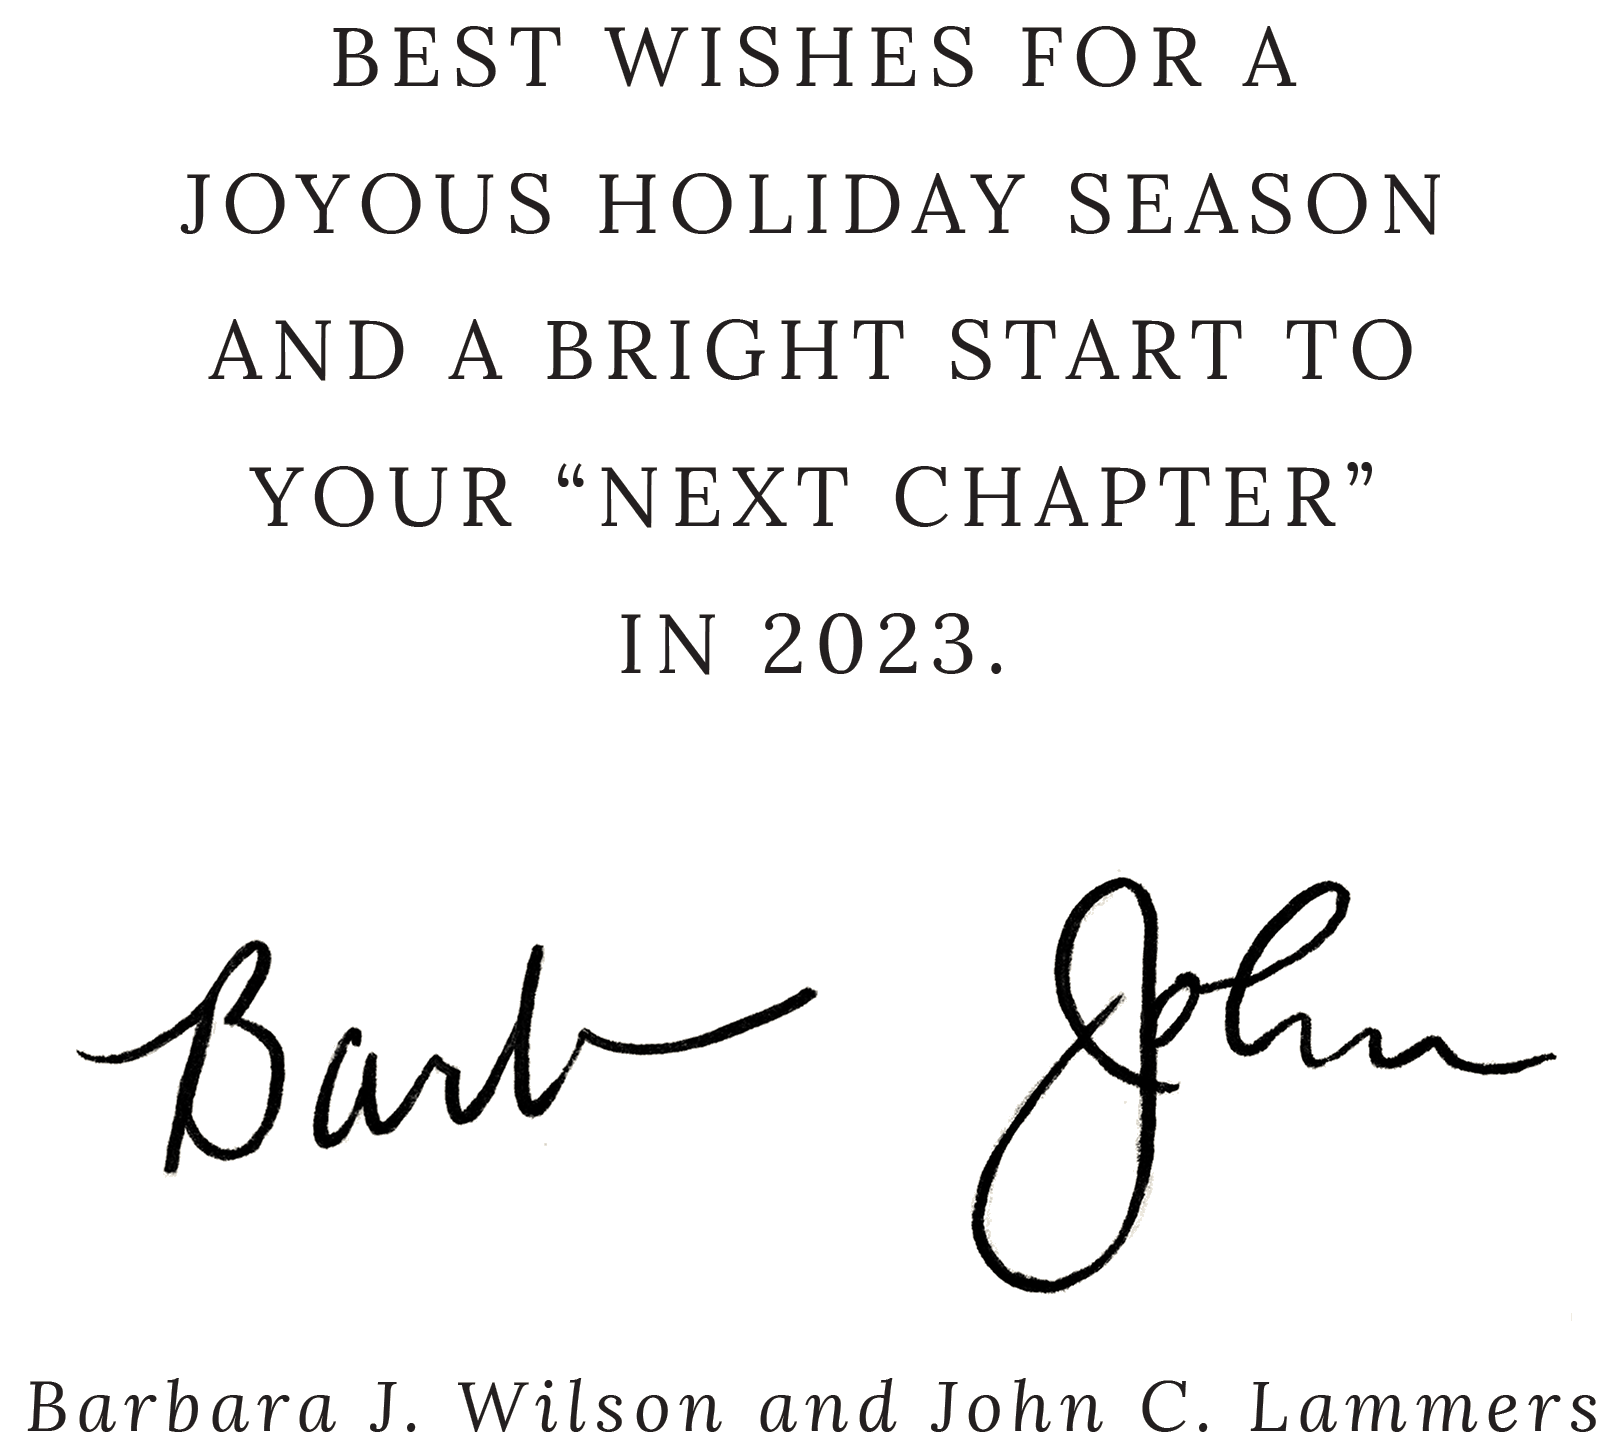 Contains the text 'Best wishes for a joyous holiday season and a bright start to your next chapter in 2023.' and a stack of colorful books. The top book is an animated gold book with 'Iowa' written on the spine that falls onto the stack.